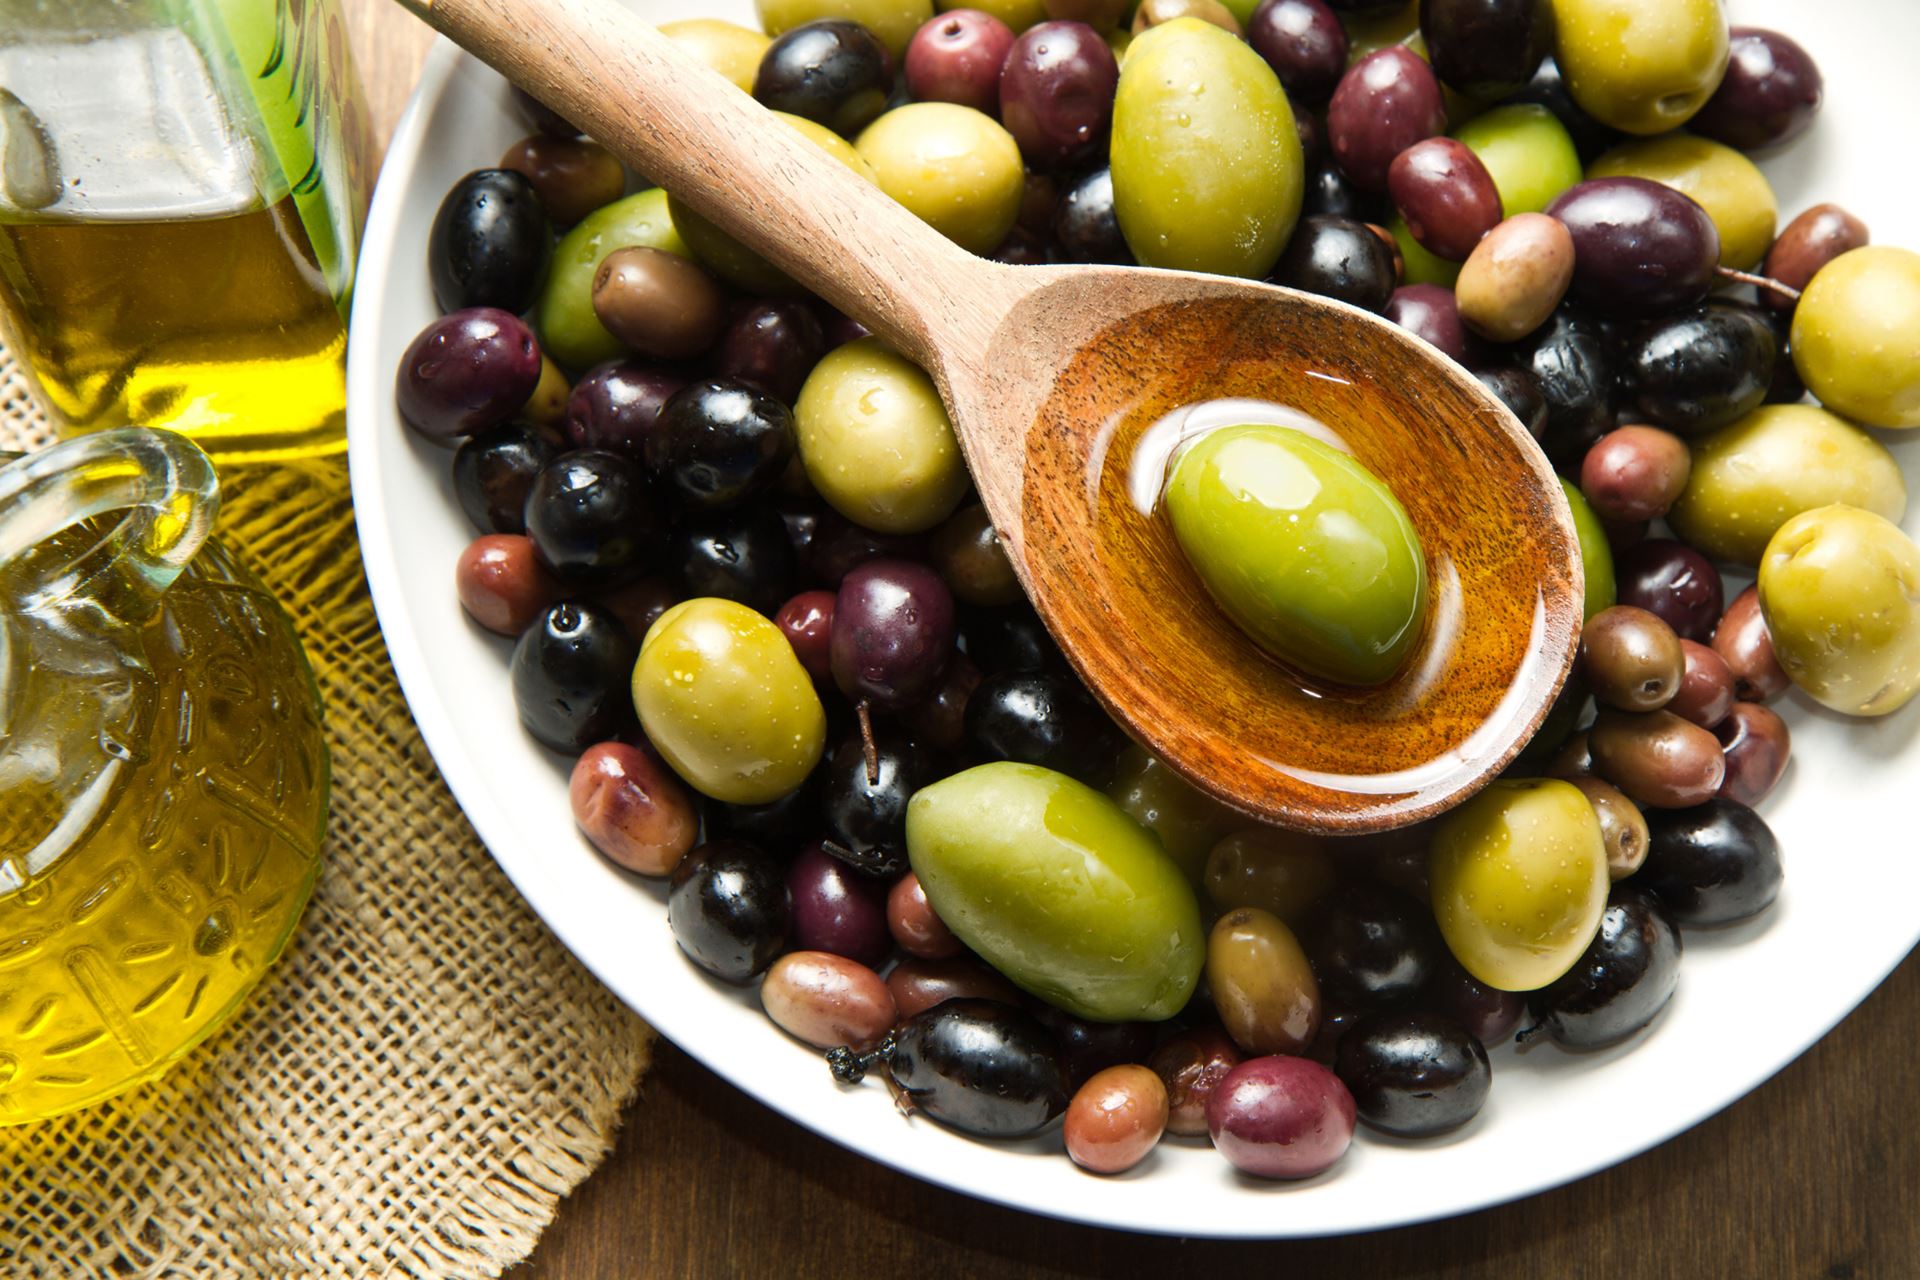 Where to buy the best olive oil and the best olives in Mendoza